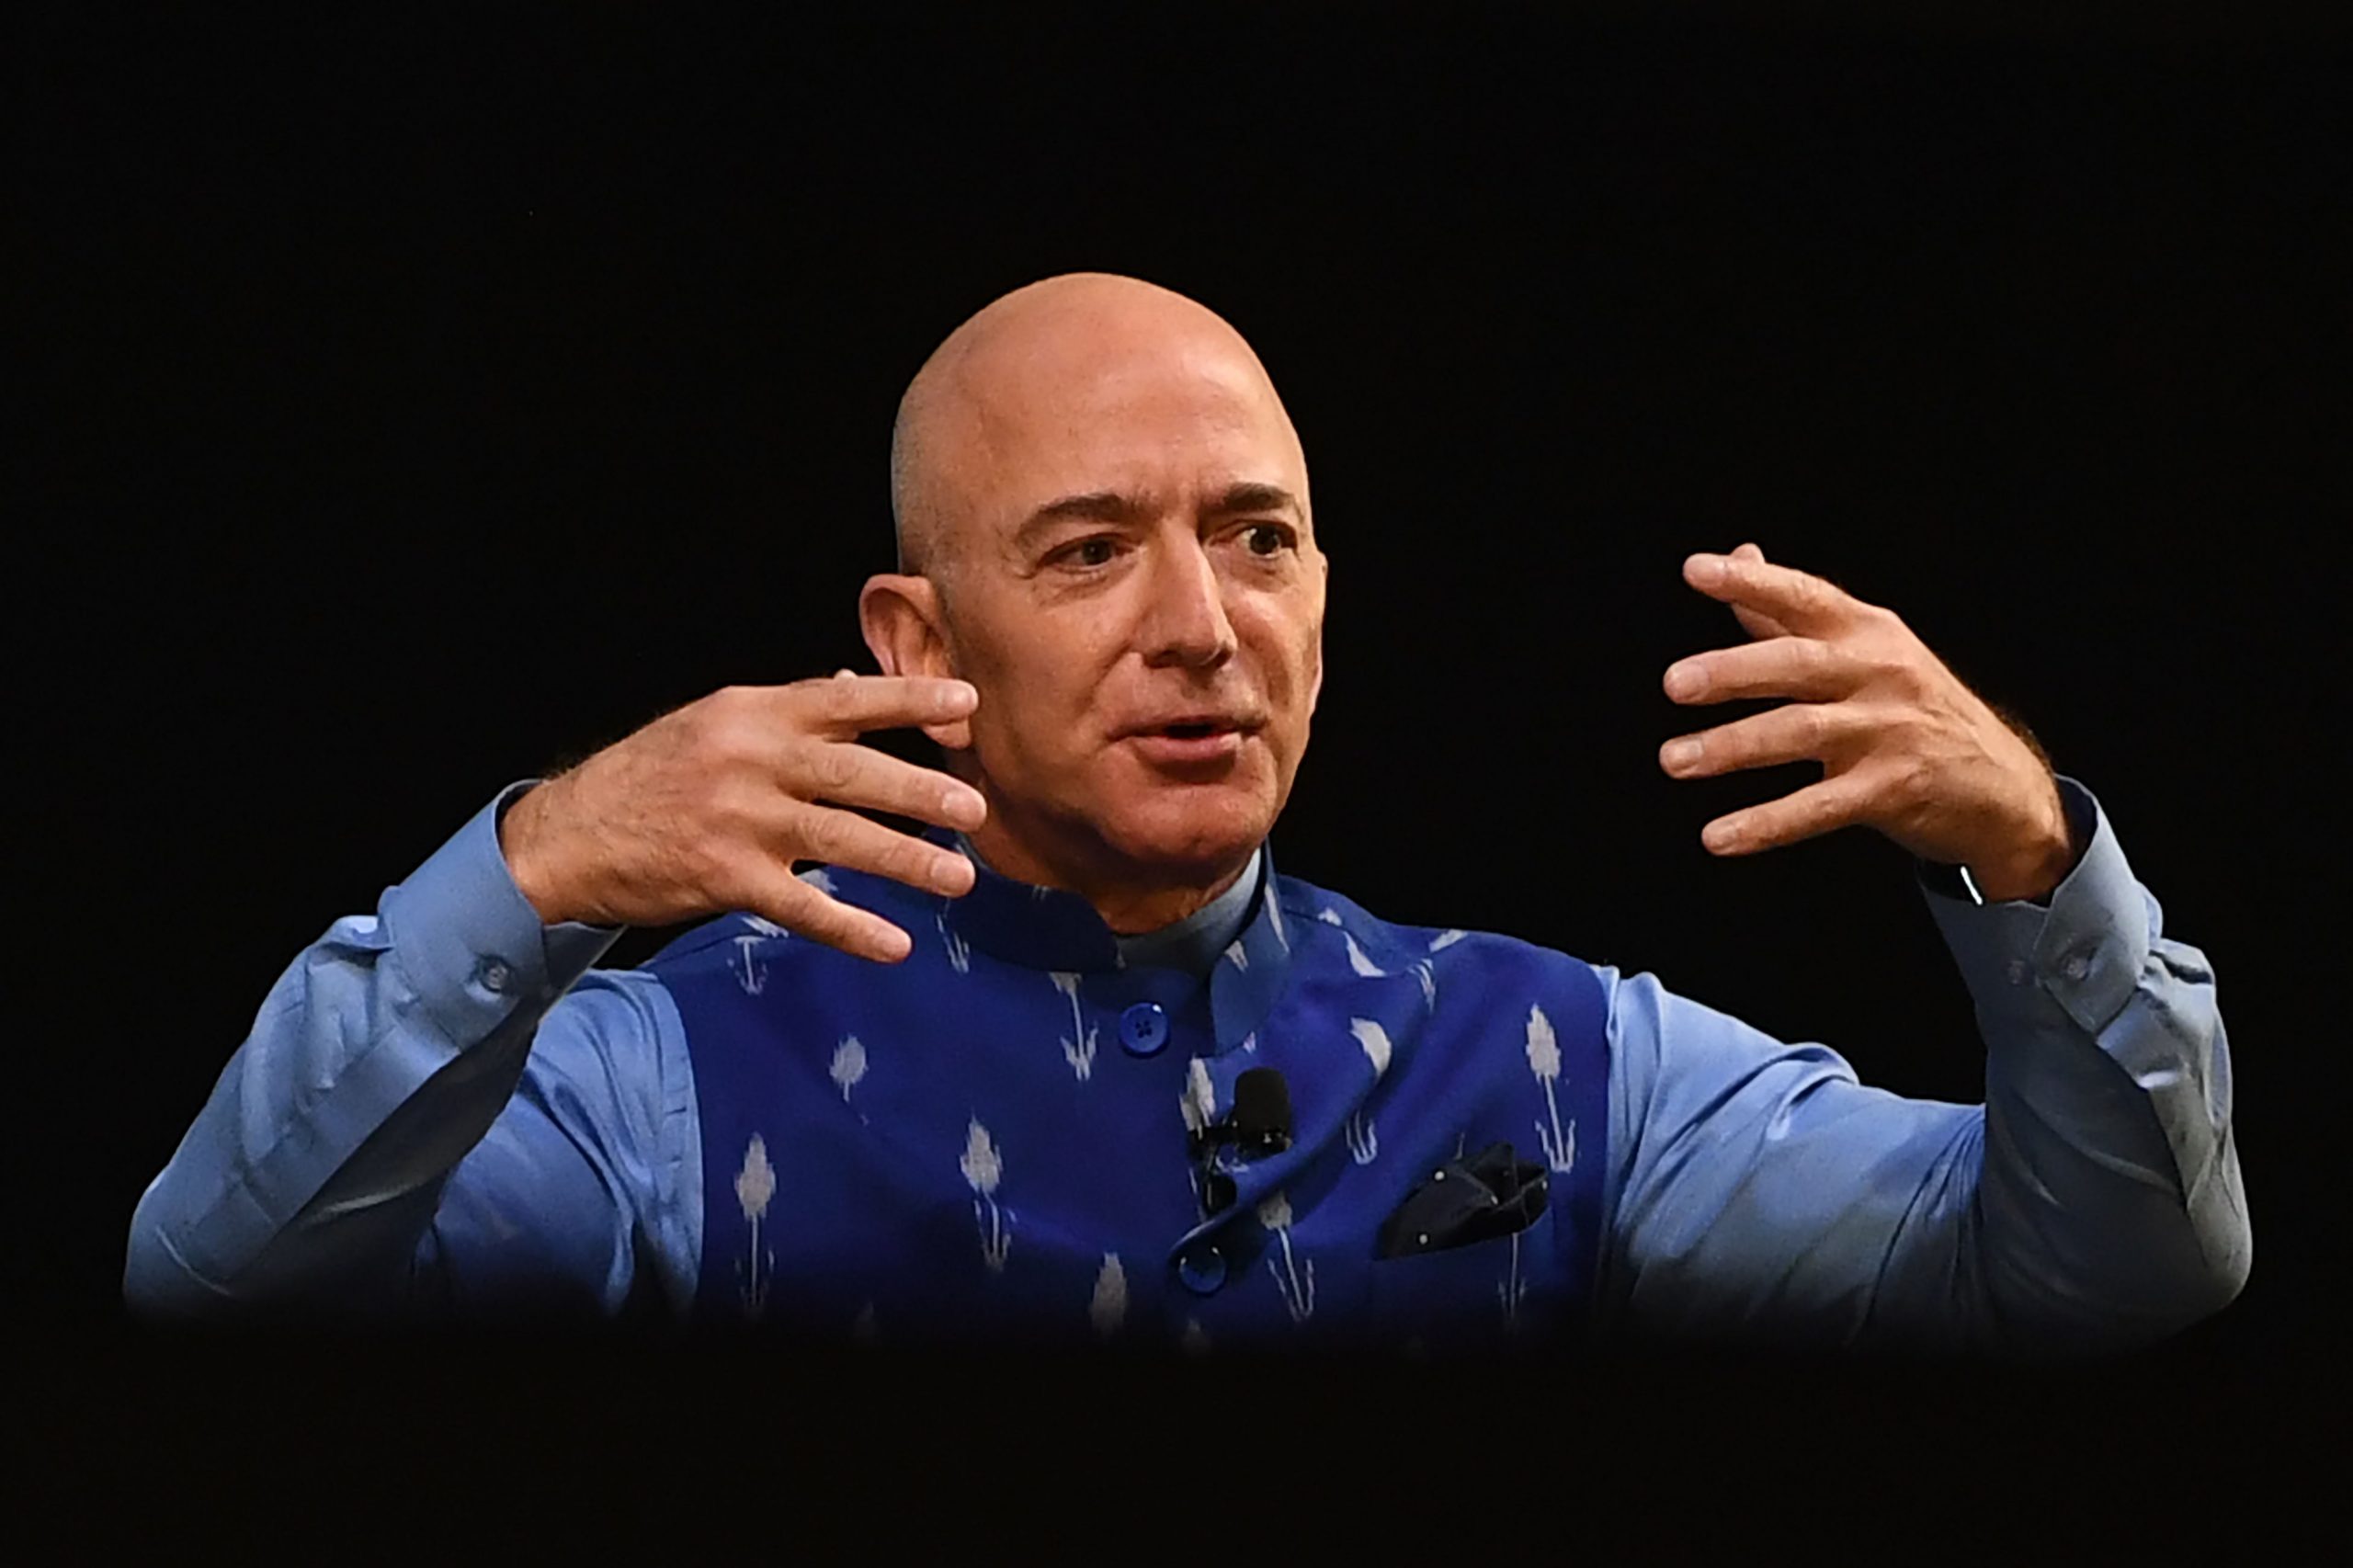 Amazon CEO Jeff Bezos to step down after the second quarter of 2021